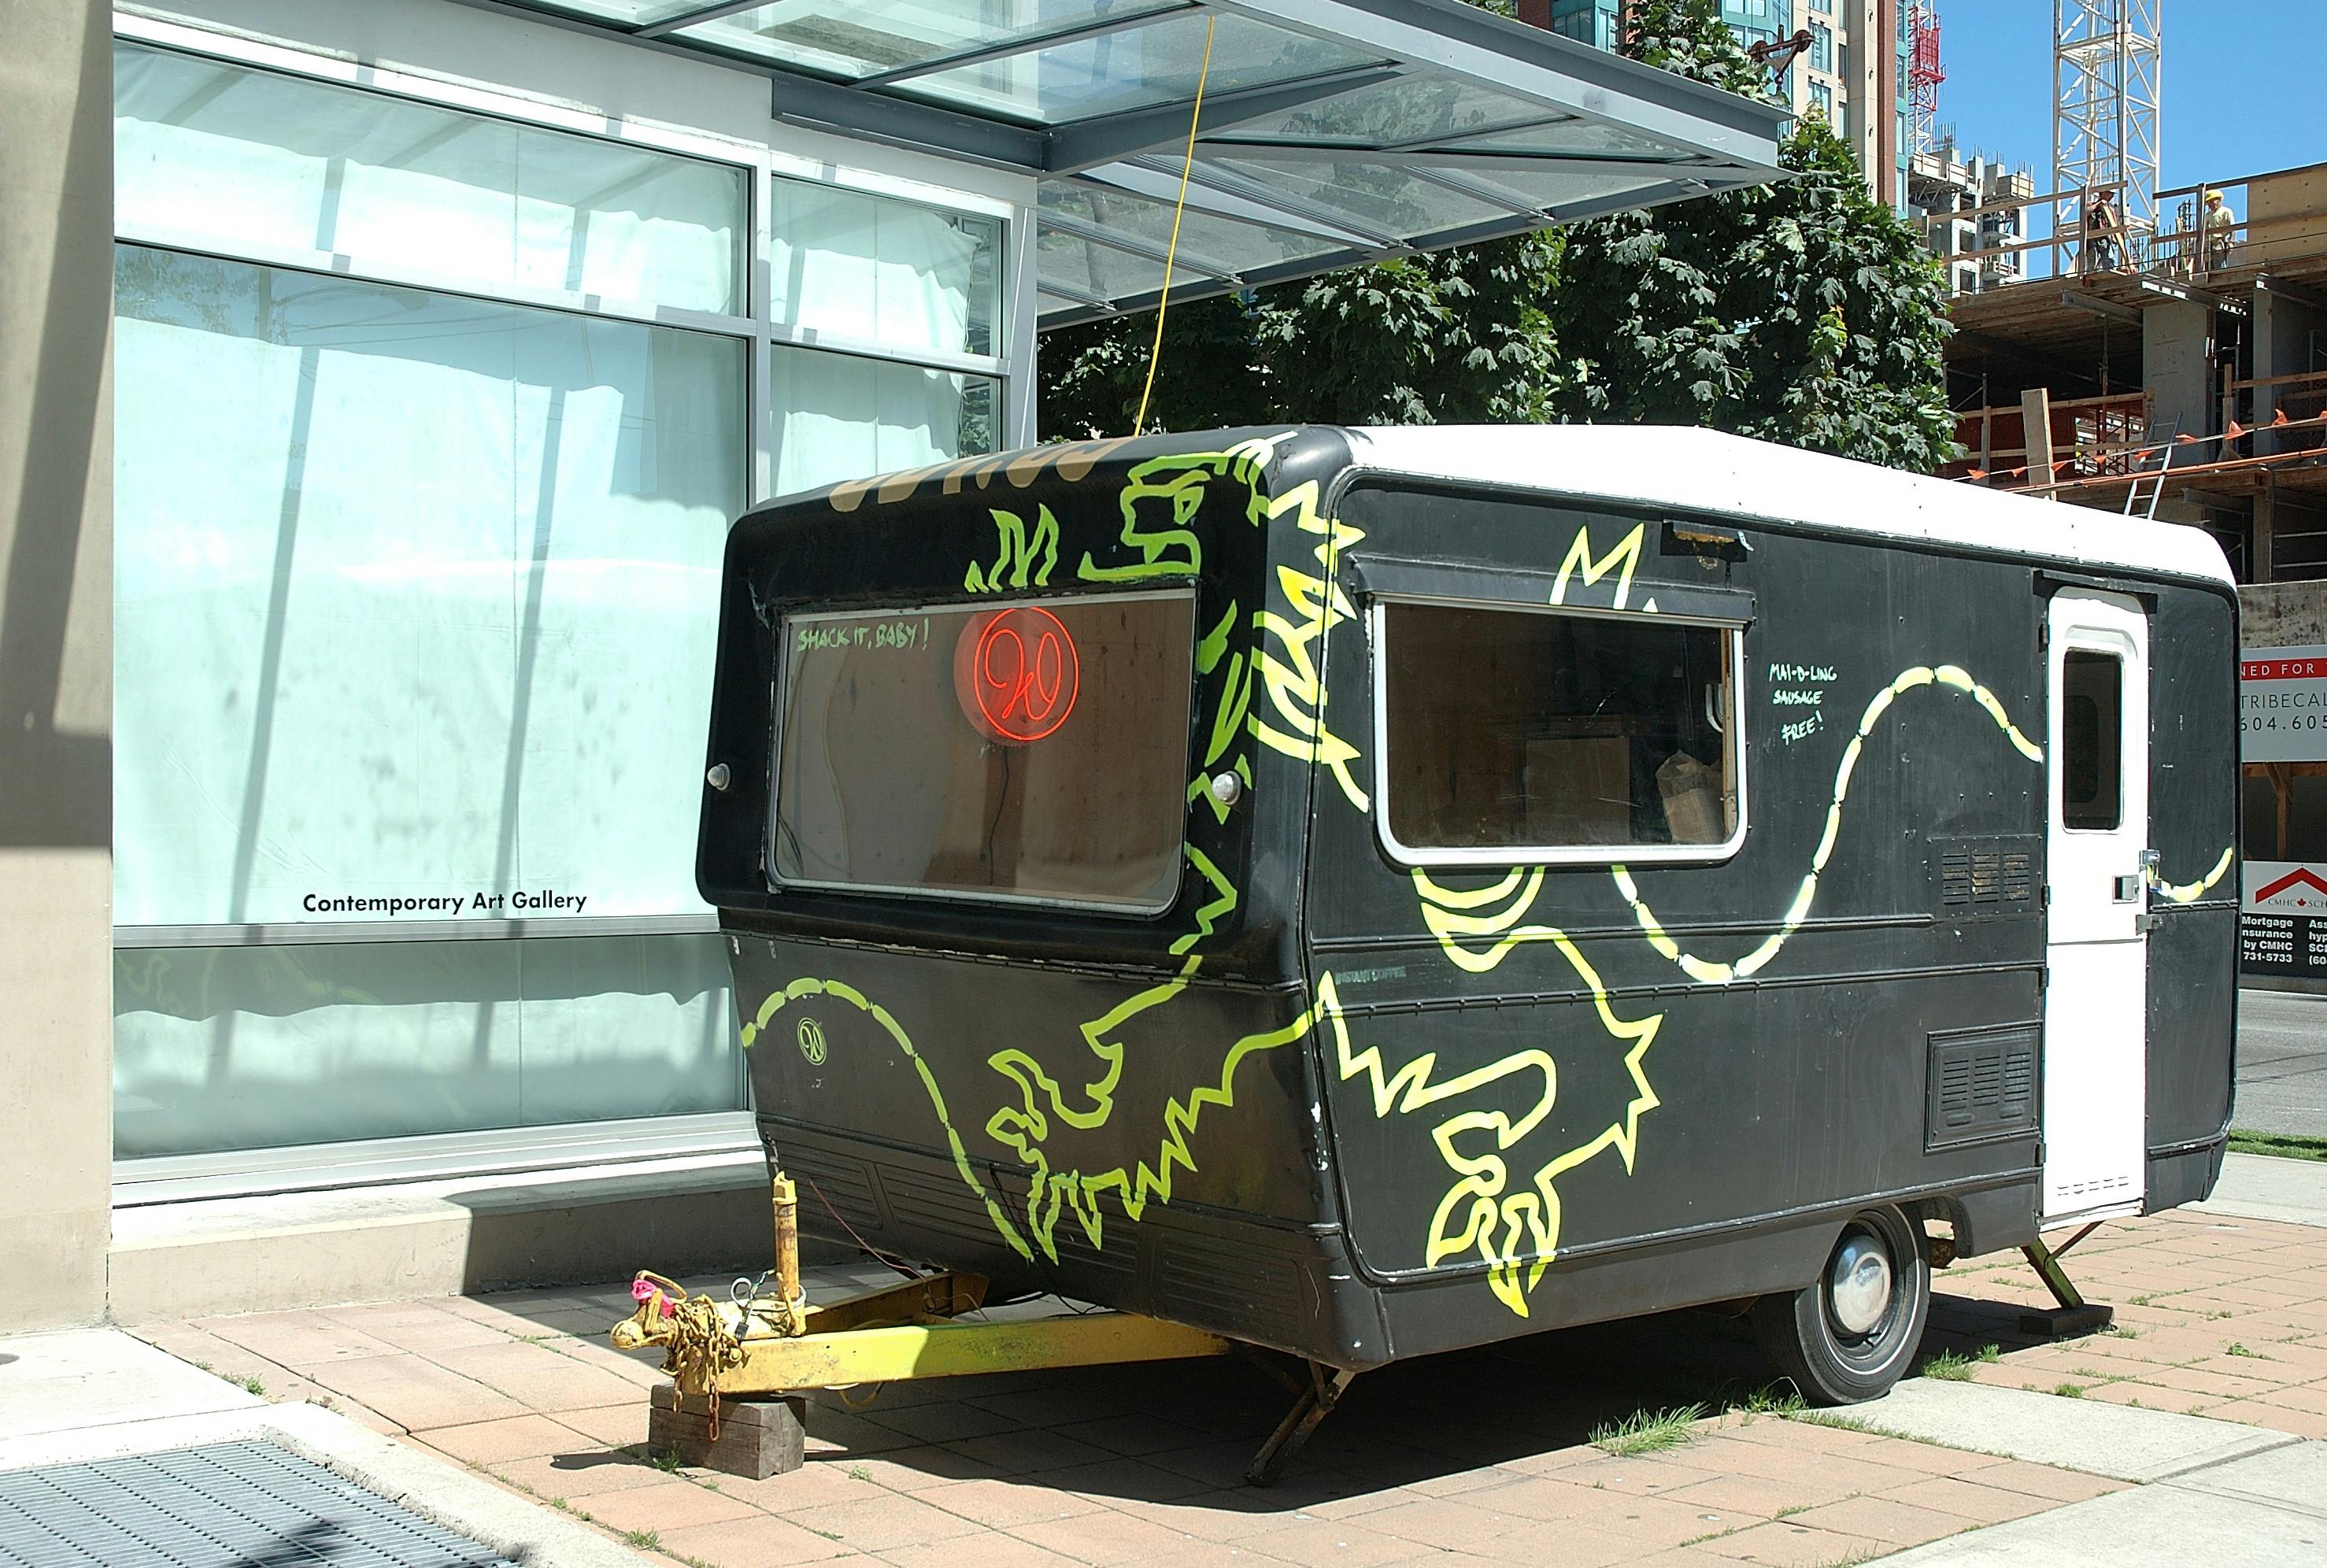 An installation image of a black camping car placed right outside the gallery. A yellow lion or dragon shape is painted on the facade of the car. 